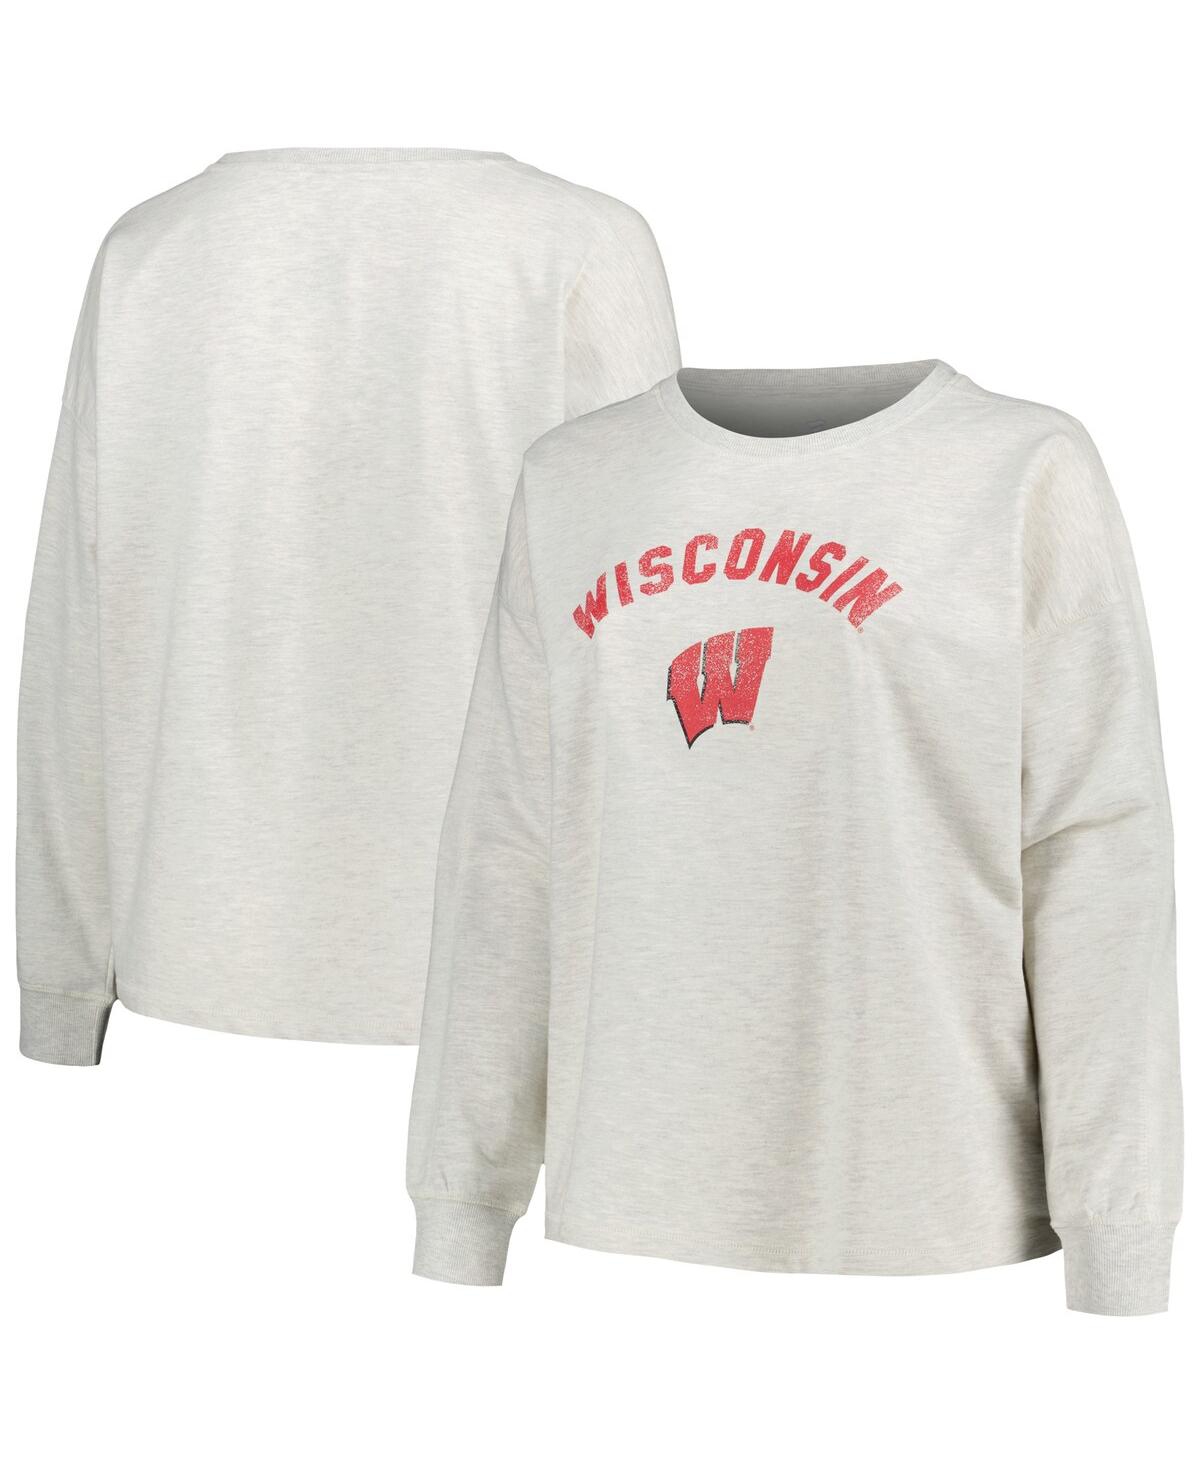 Women's Oatmeal Wisconsin Badgers Plus Size Distressed Arch Over Logo Neutral Boxy Pullover Sweatshirt - Oatmeal